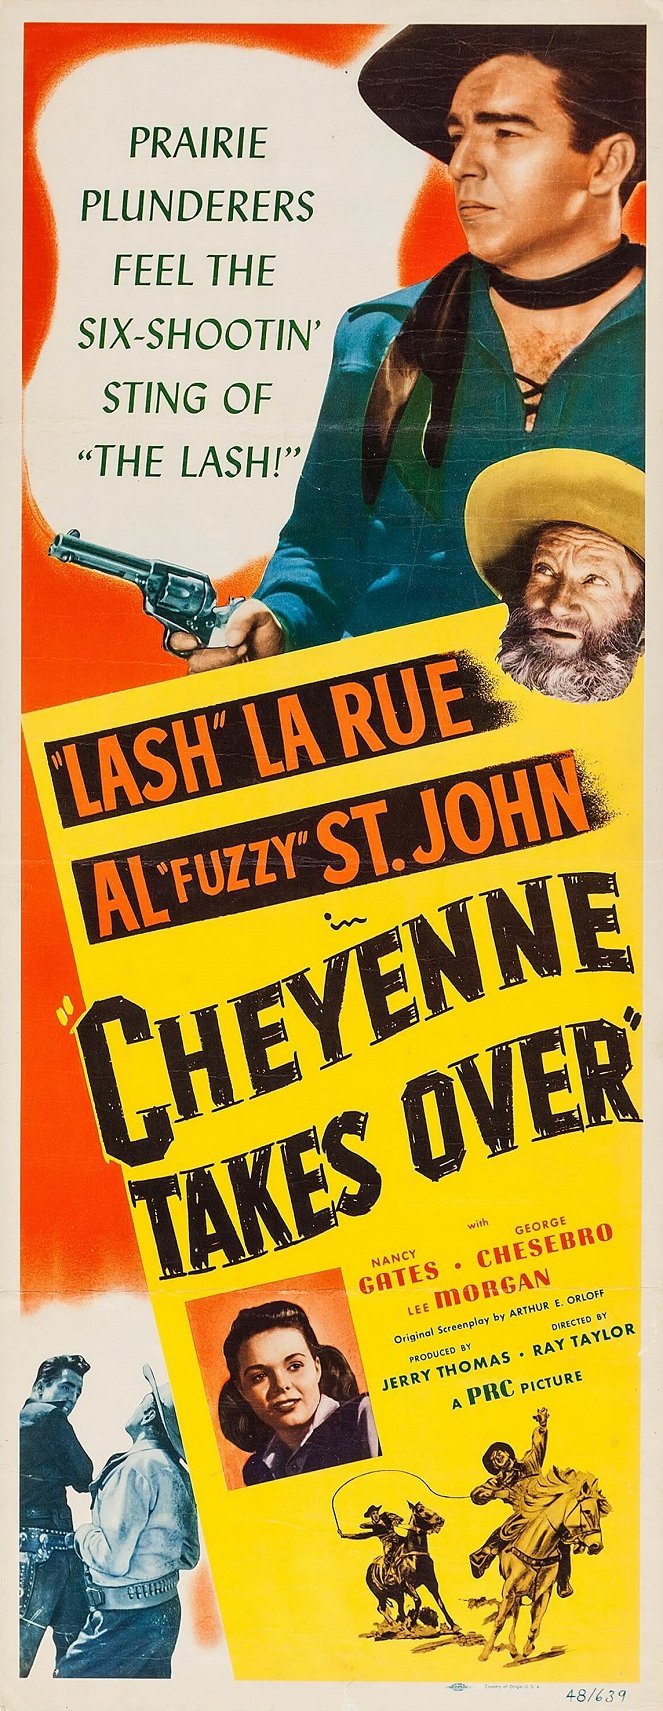 Cheyenne Takes Over - Posters